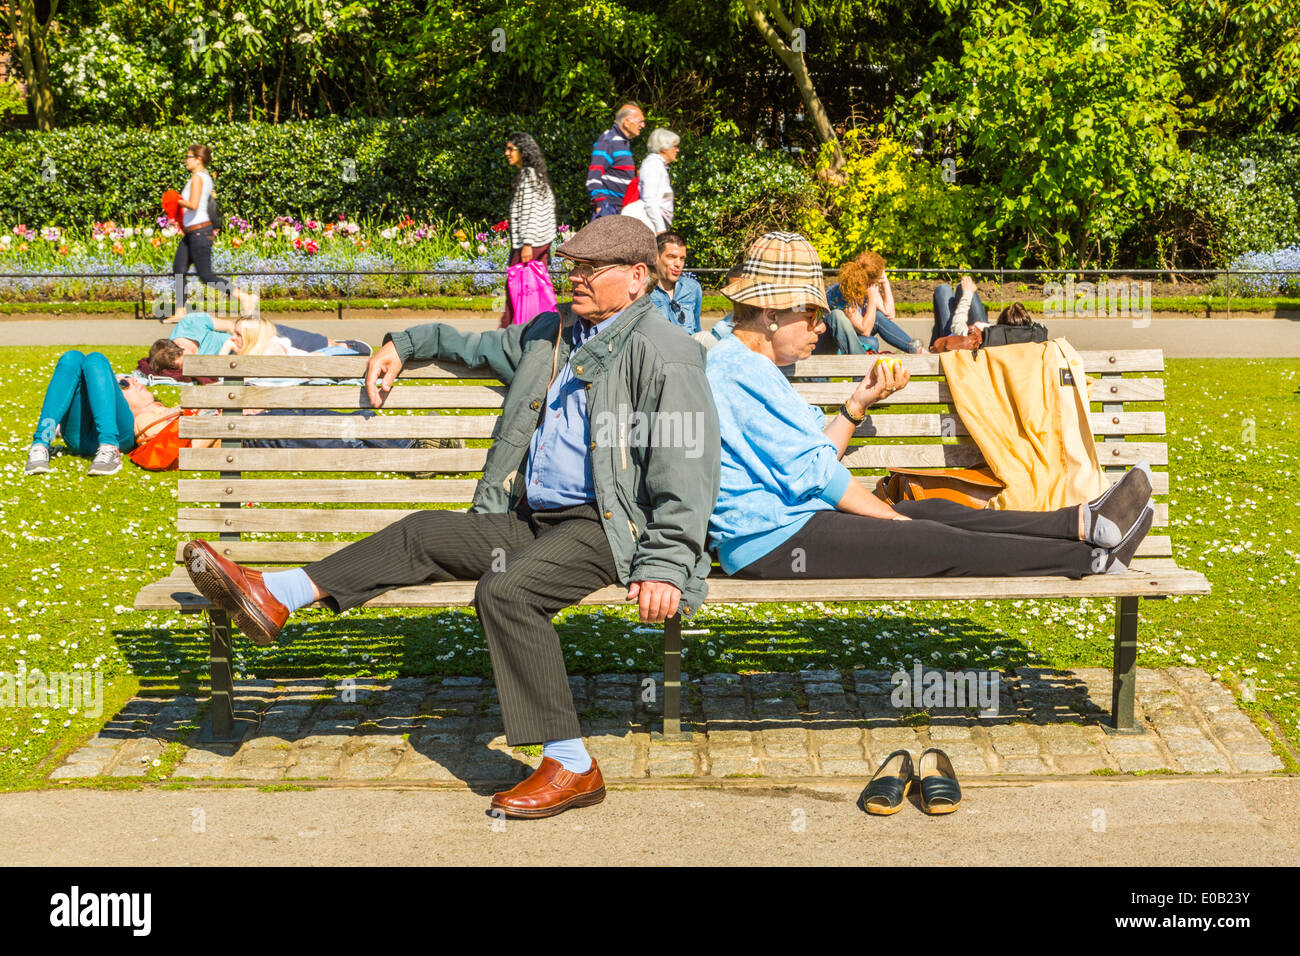 A senior Couple sitting and relaxing in the sunshine on a park bench, Regents Park London,England UK Stock Photo